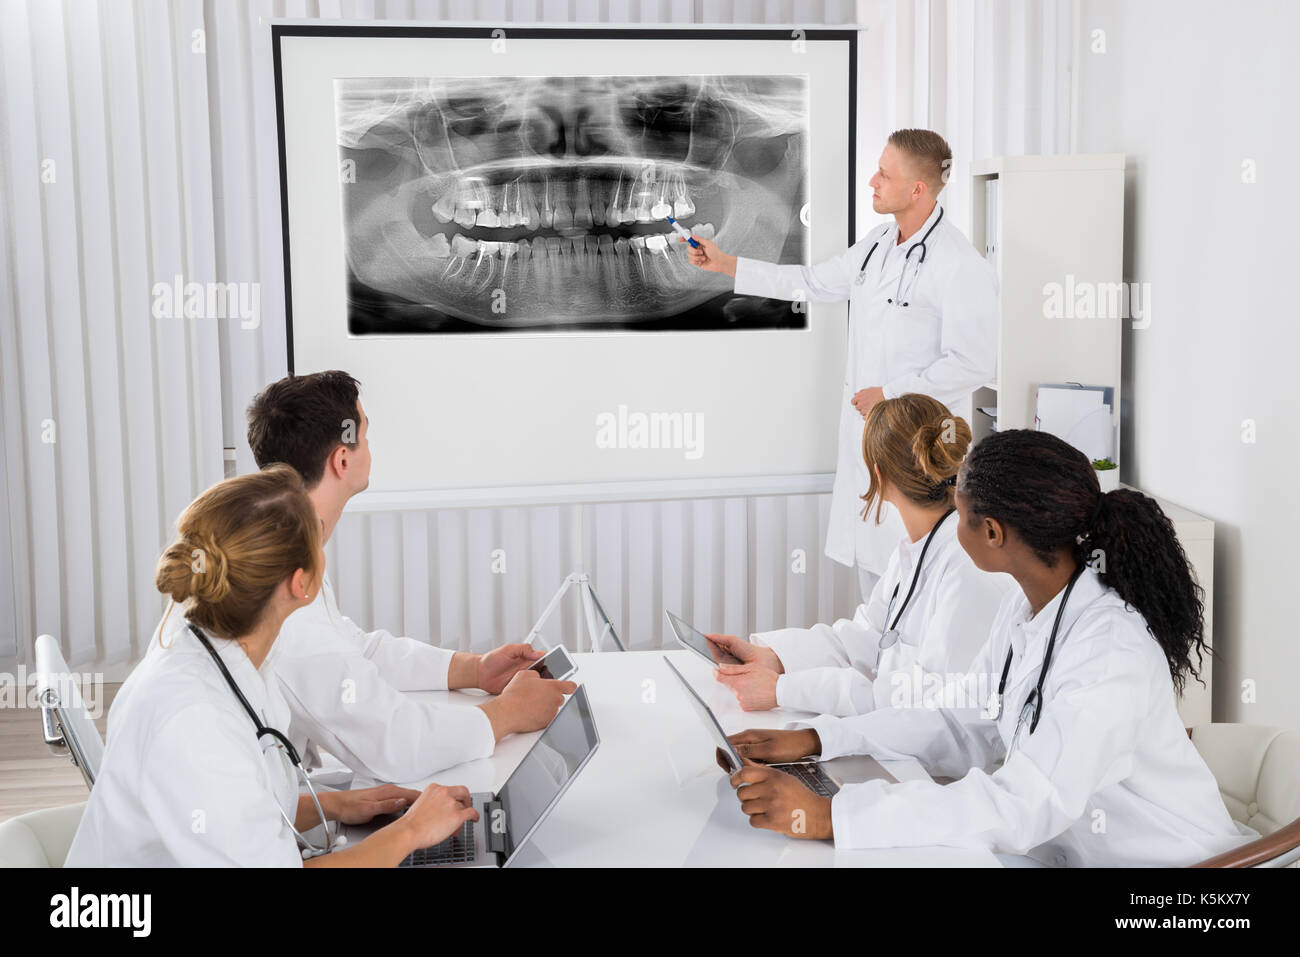 Young Male Doctor Explaining Human Teeth X-ray To His Colleagues Stock Photo